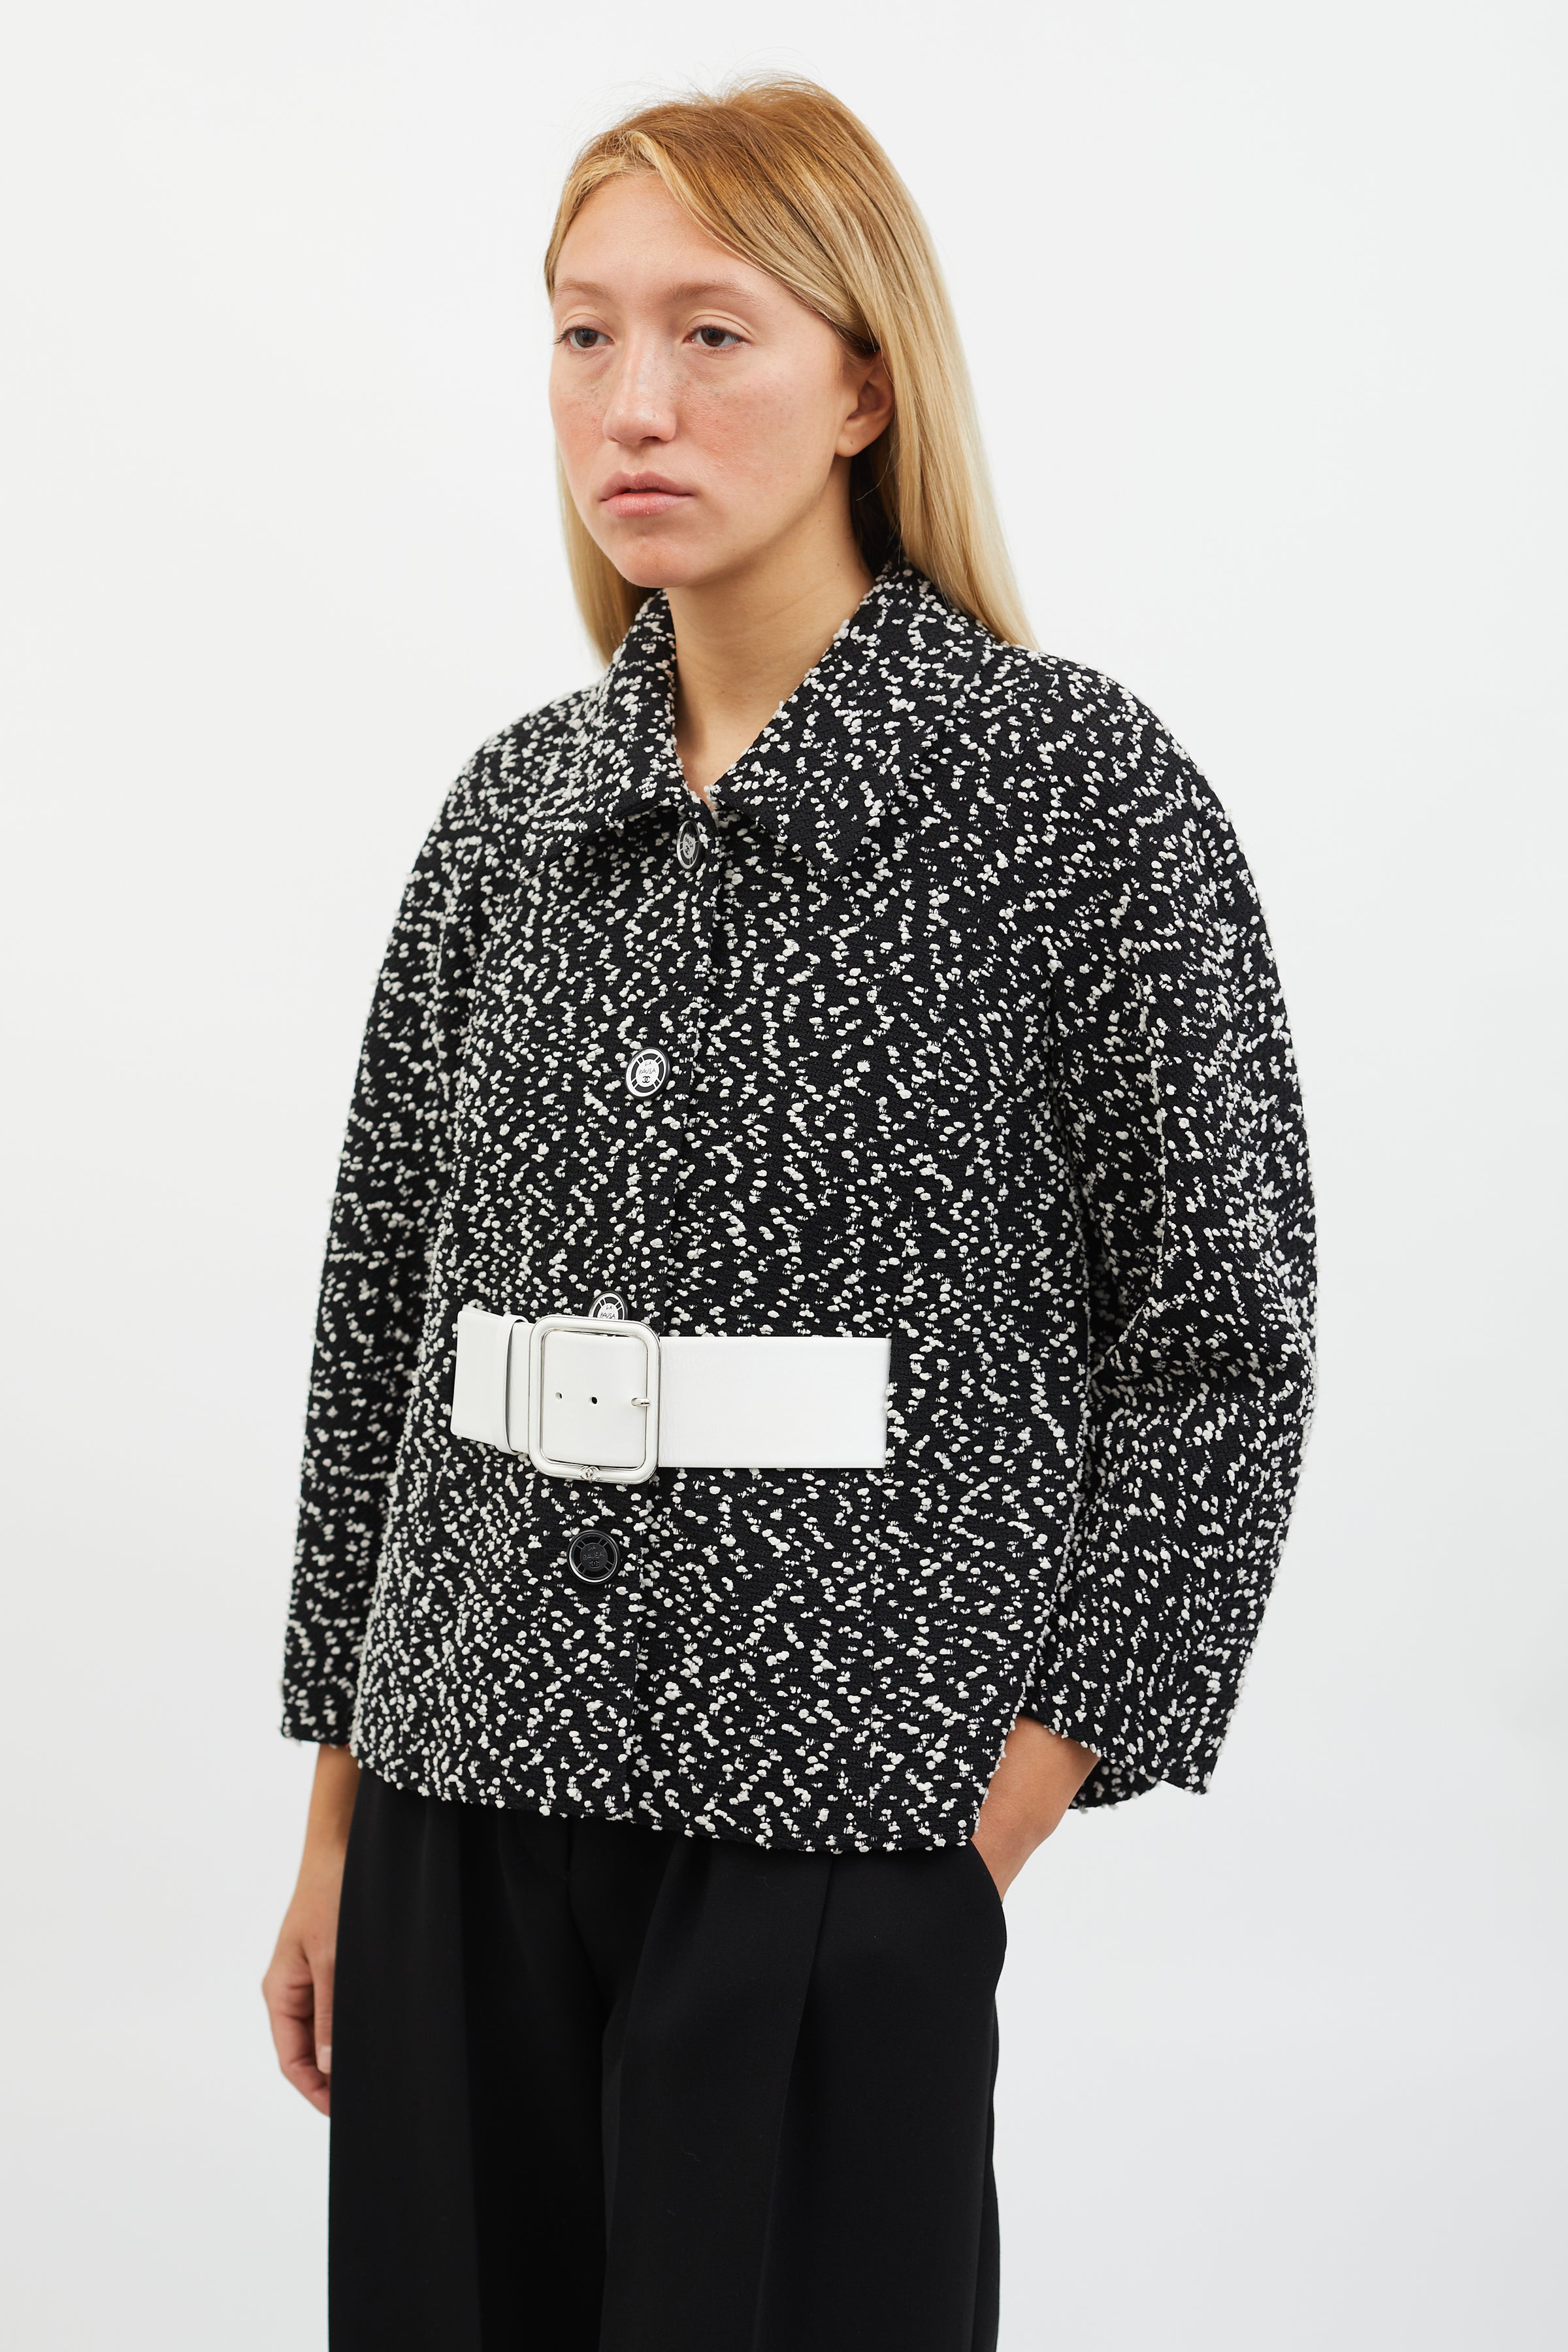 Chanel  SS 2022 Black  White Bouclé Belted Cropped Jacket  VSP  Consignment